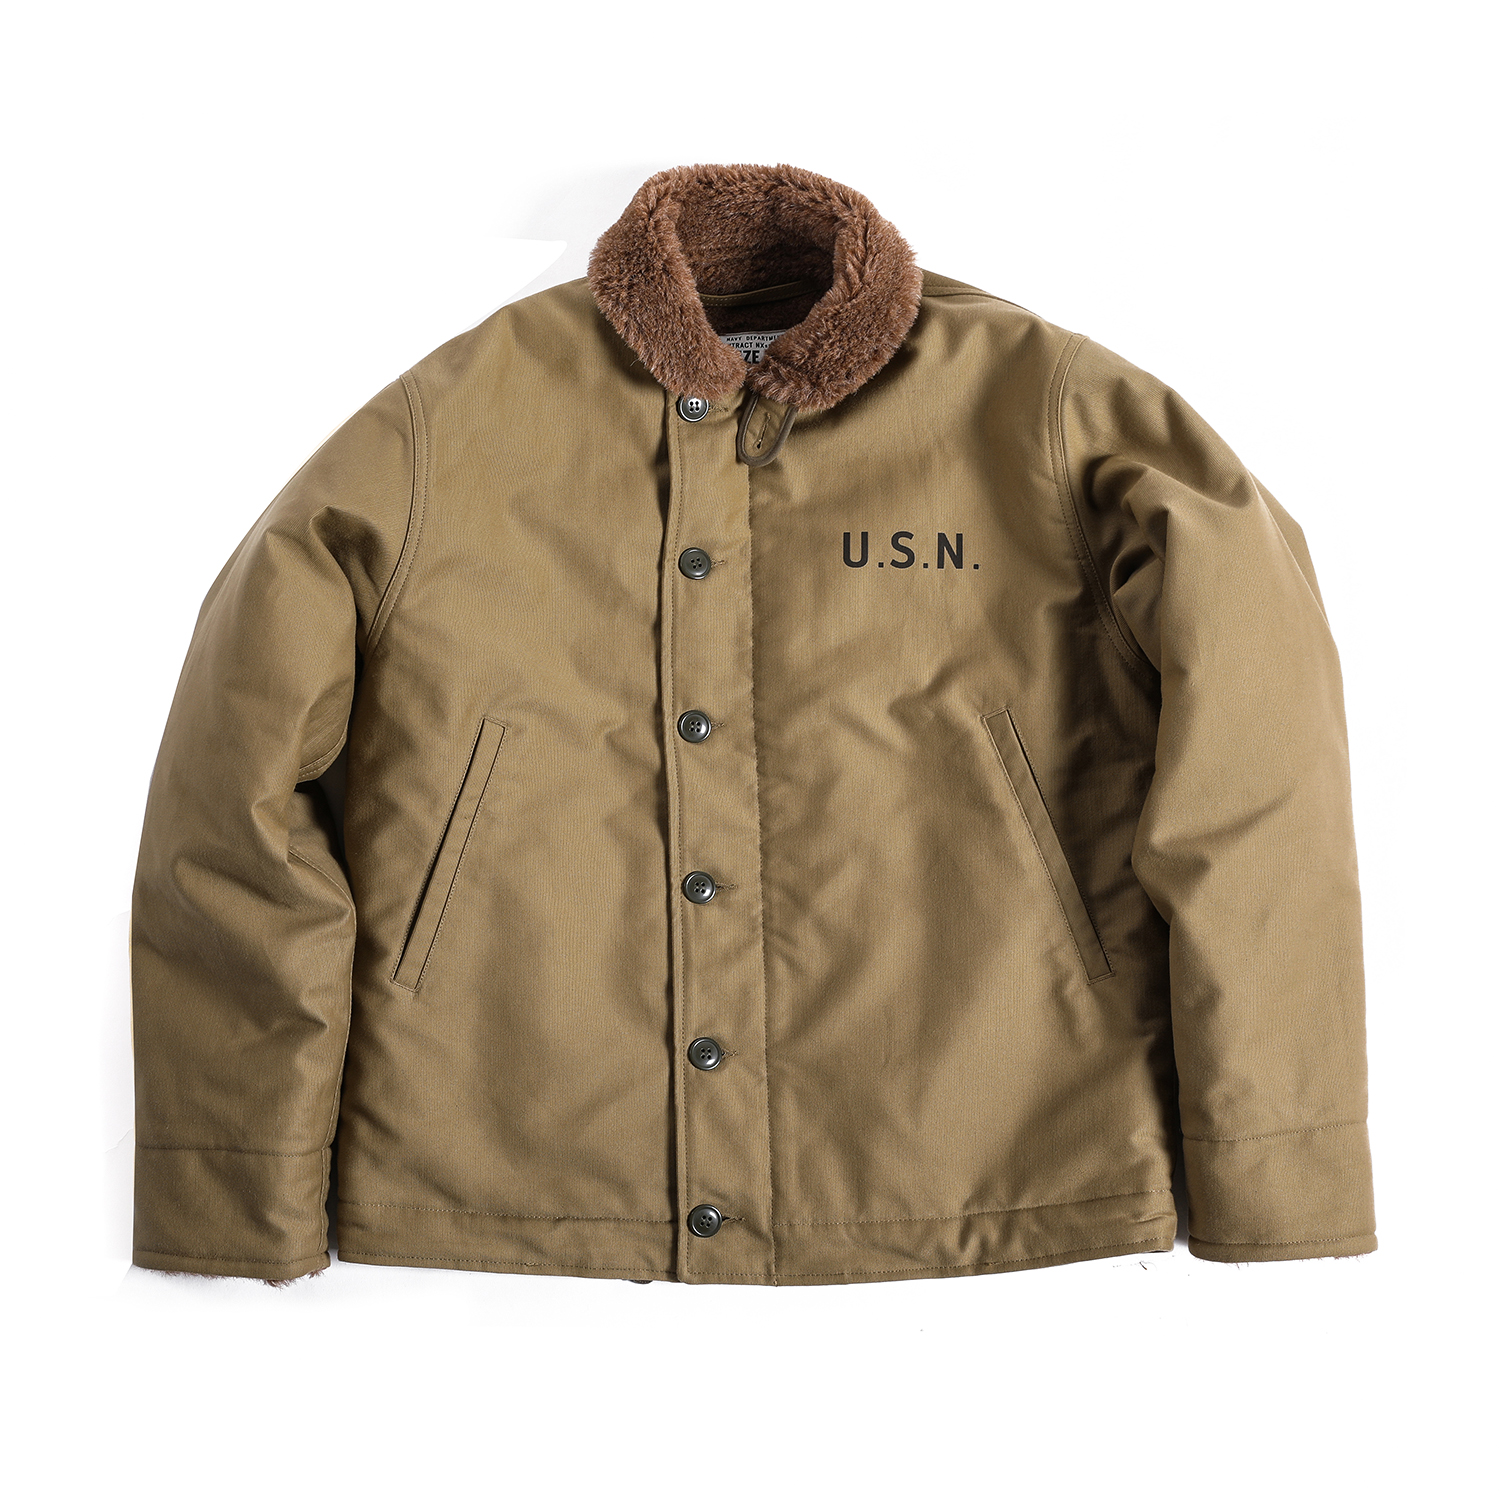 Deck Suit - 38 (with usn mimeograph on the chest) in stock, Khaki